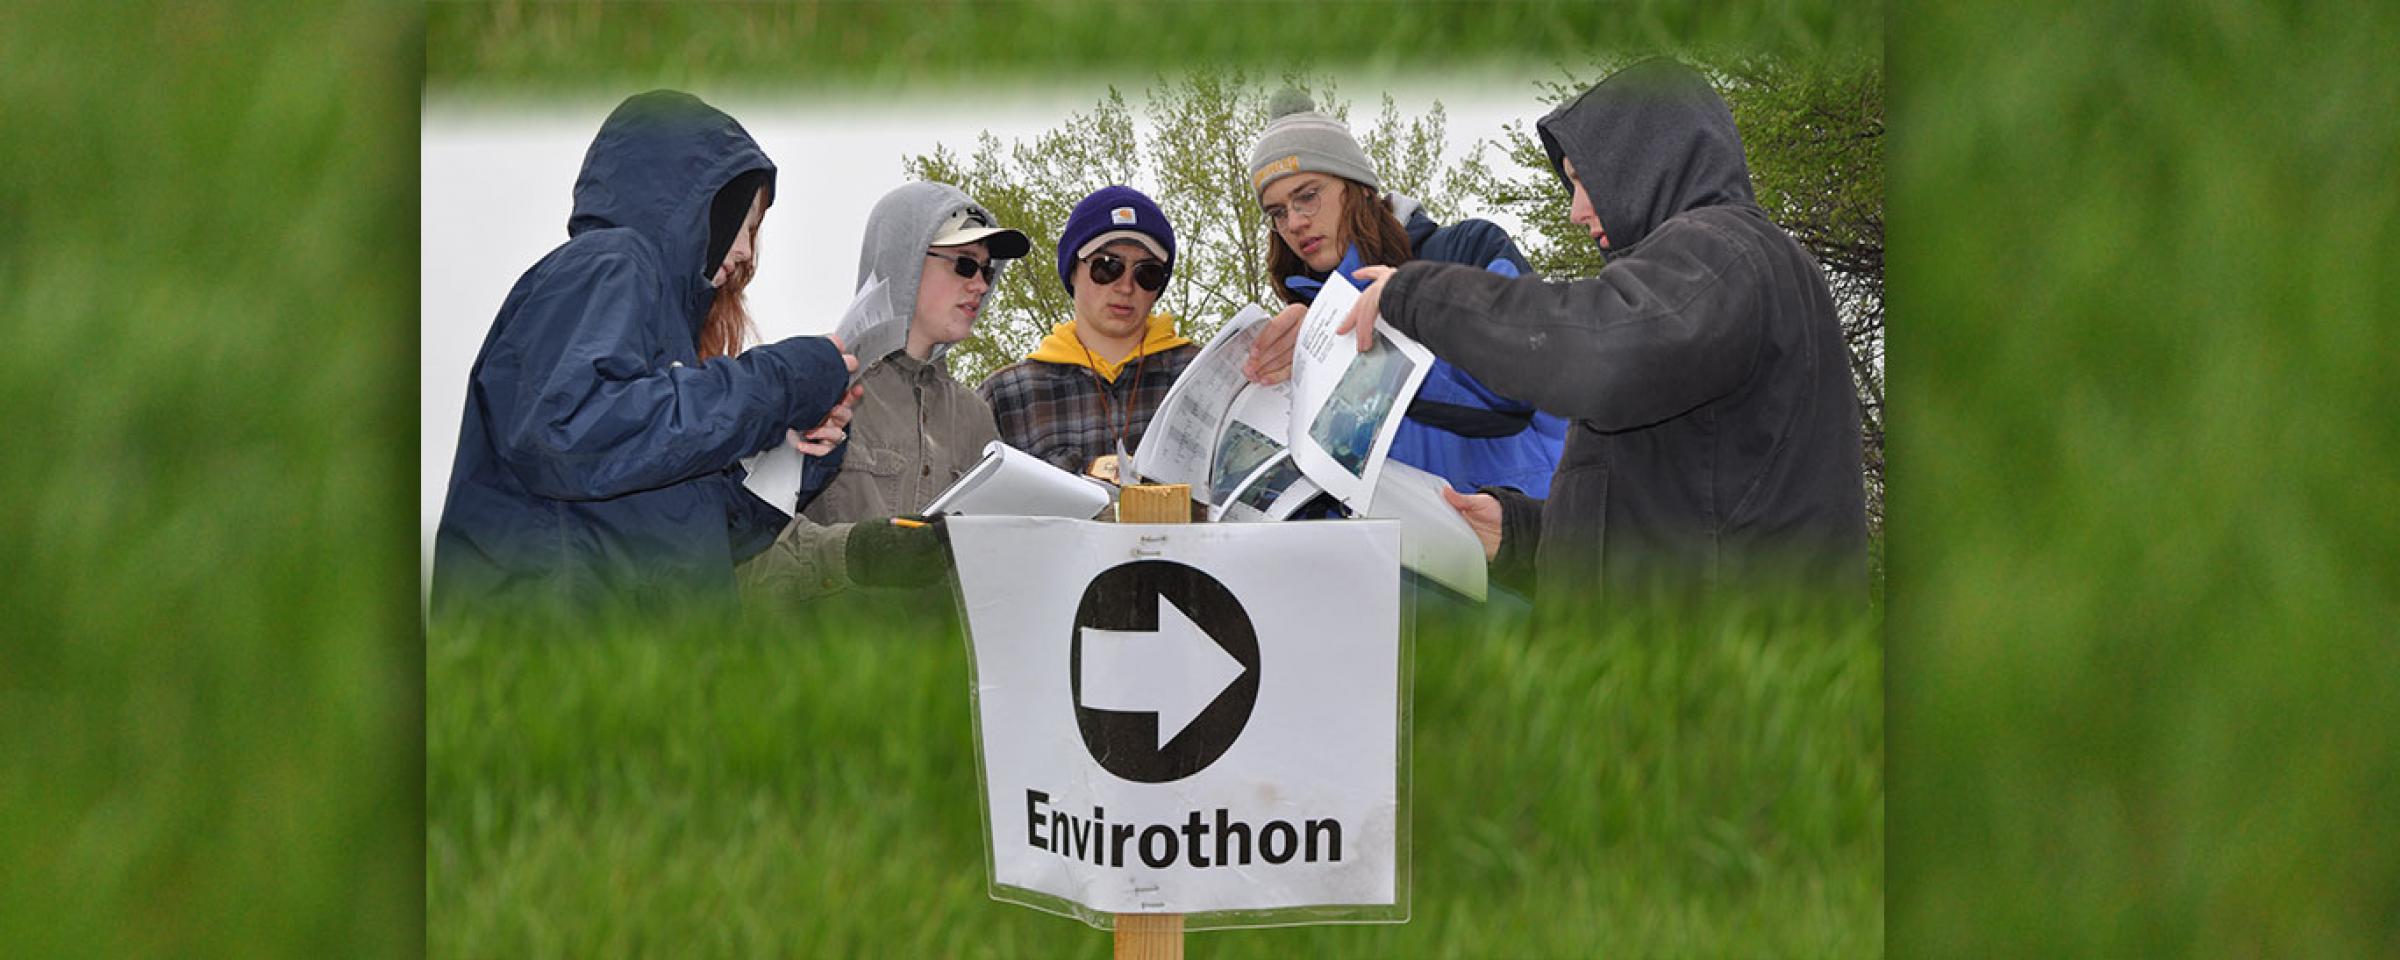 Kids participating in Envirothon